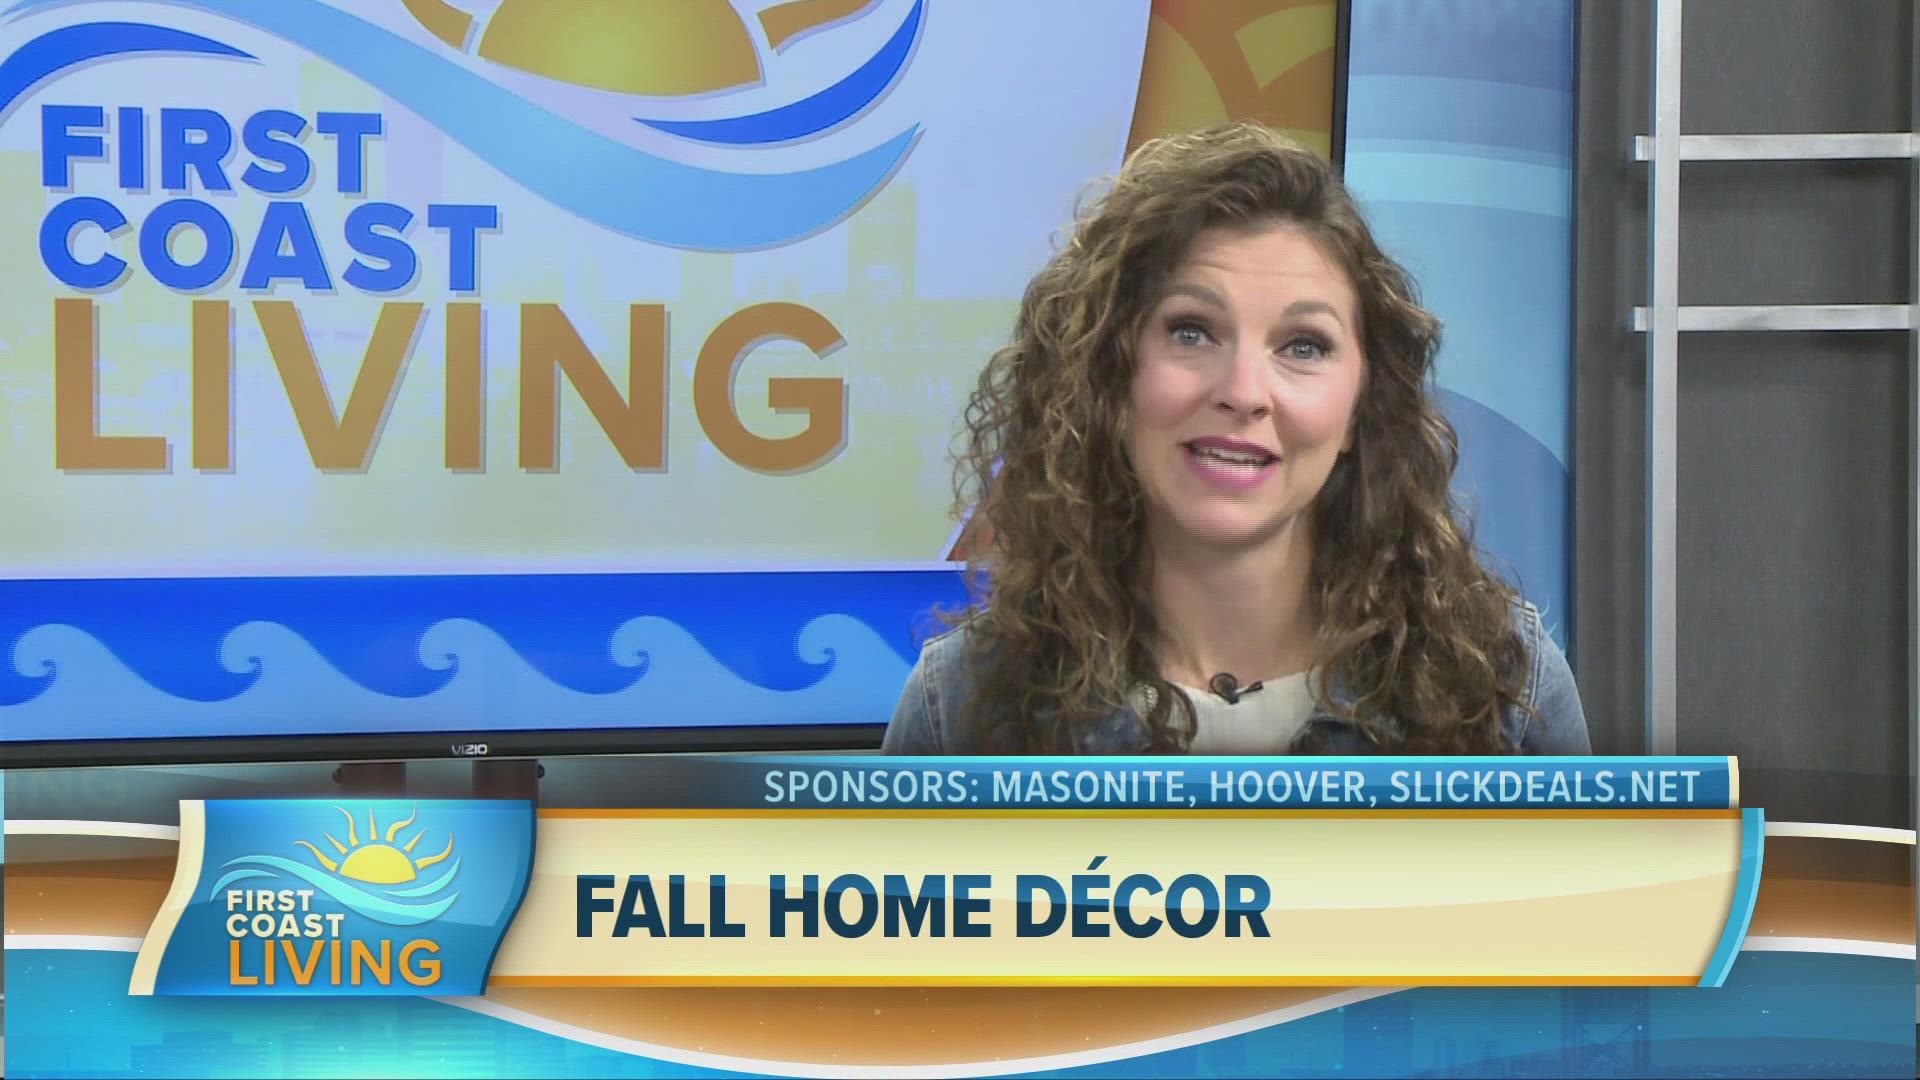 Renowned designer, Lauren Makk shares cool new trends to makeover your home for a fabulous fall look.